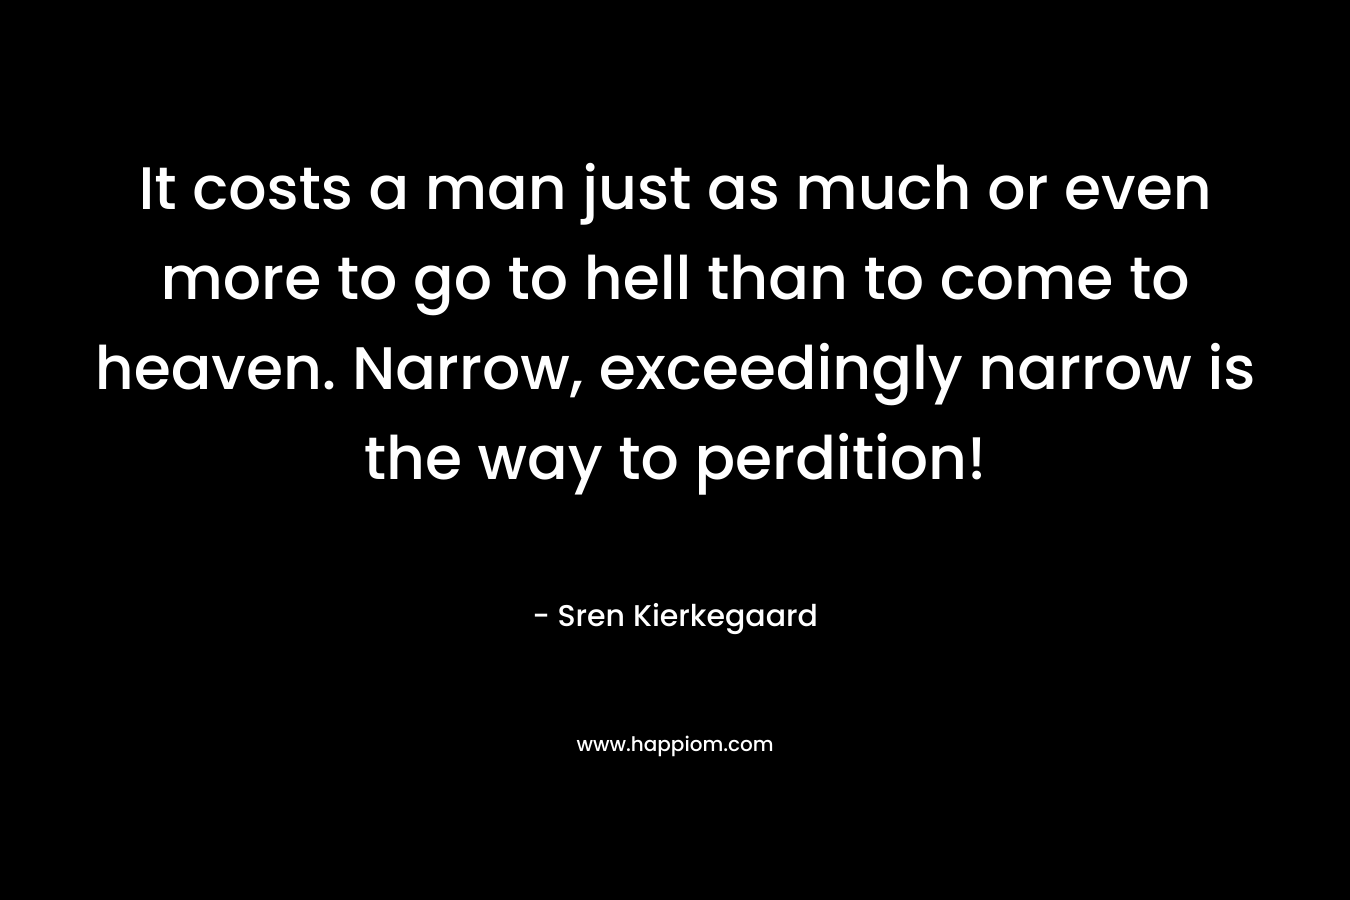 It costs a man just as much or even more to go to hell than to come to heaven. Narrow, exceedingly narrow is the way to perdition!